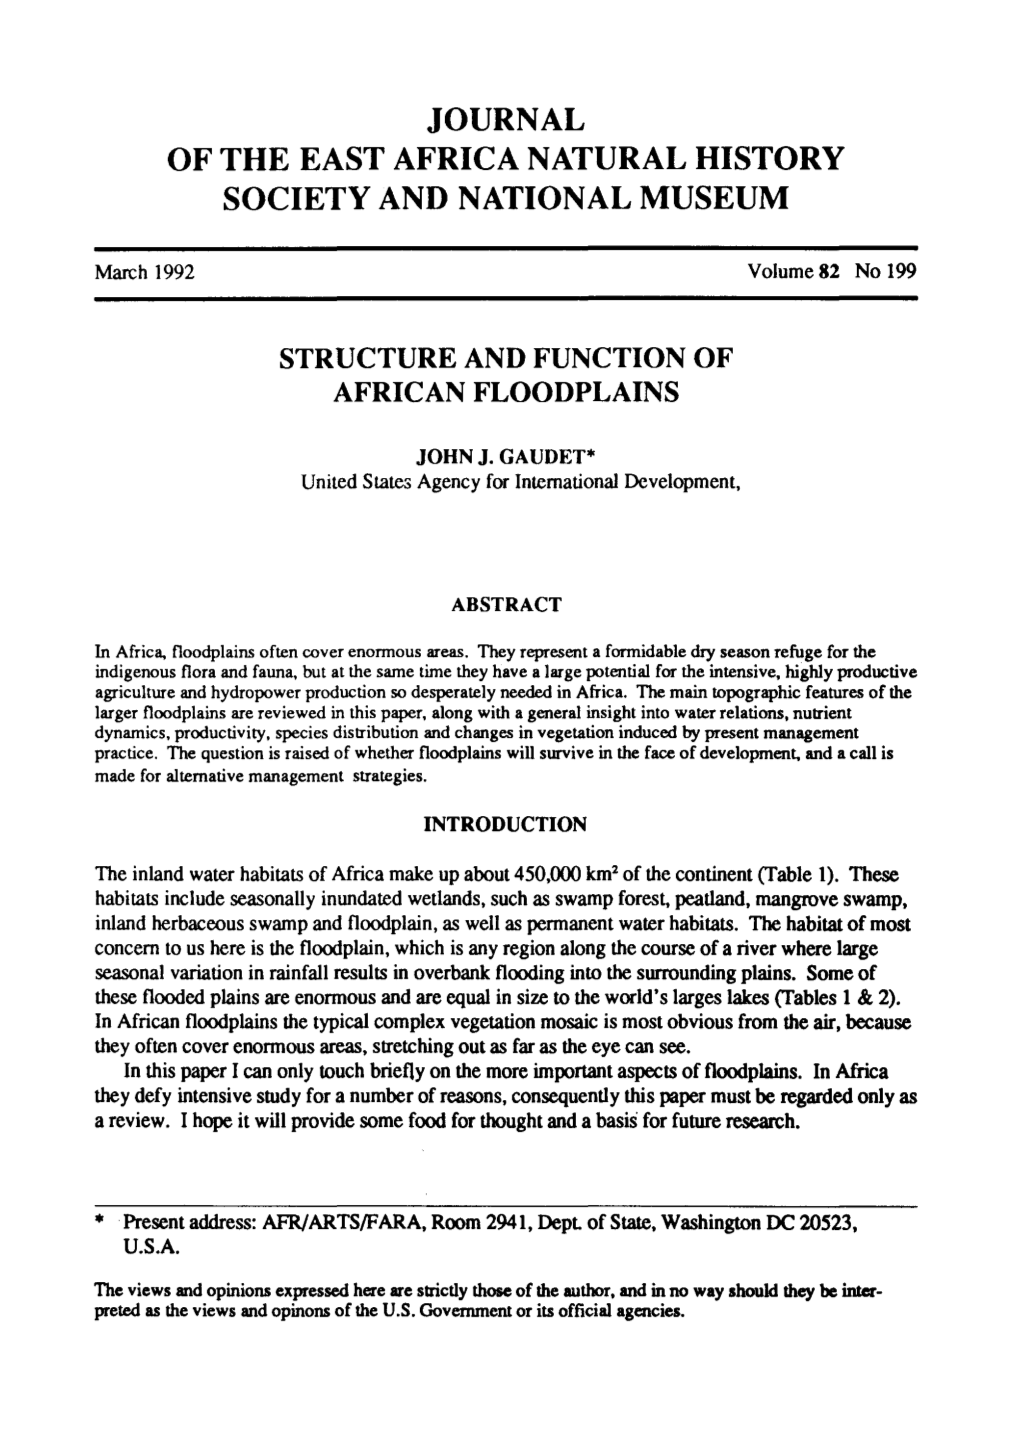 Structure and Function of African Floodplains